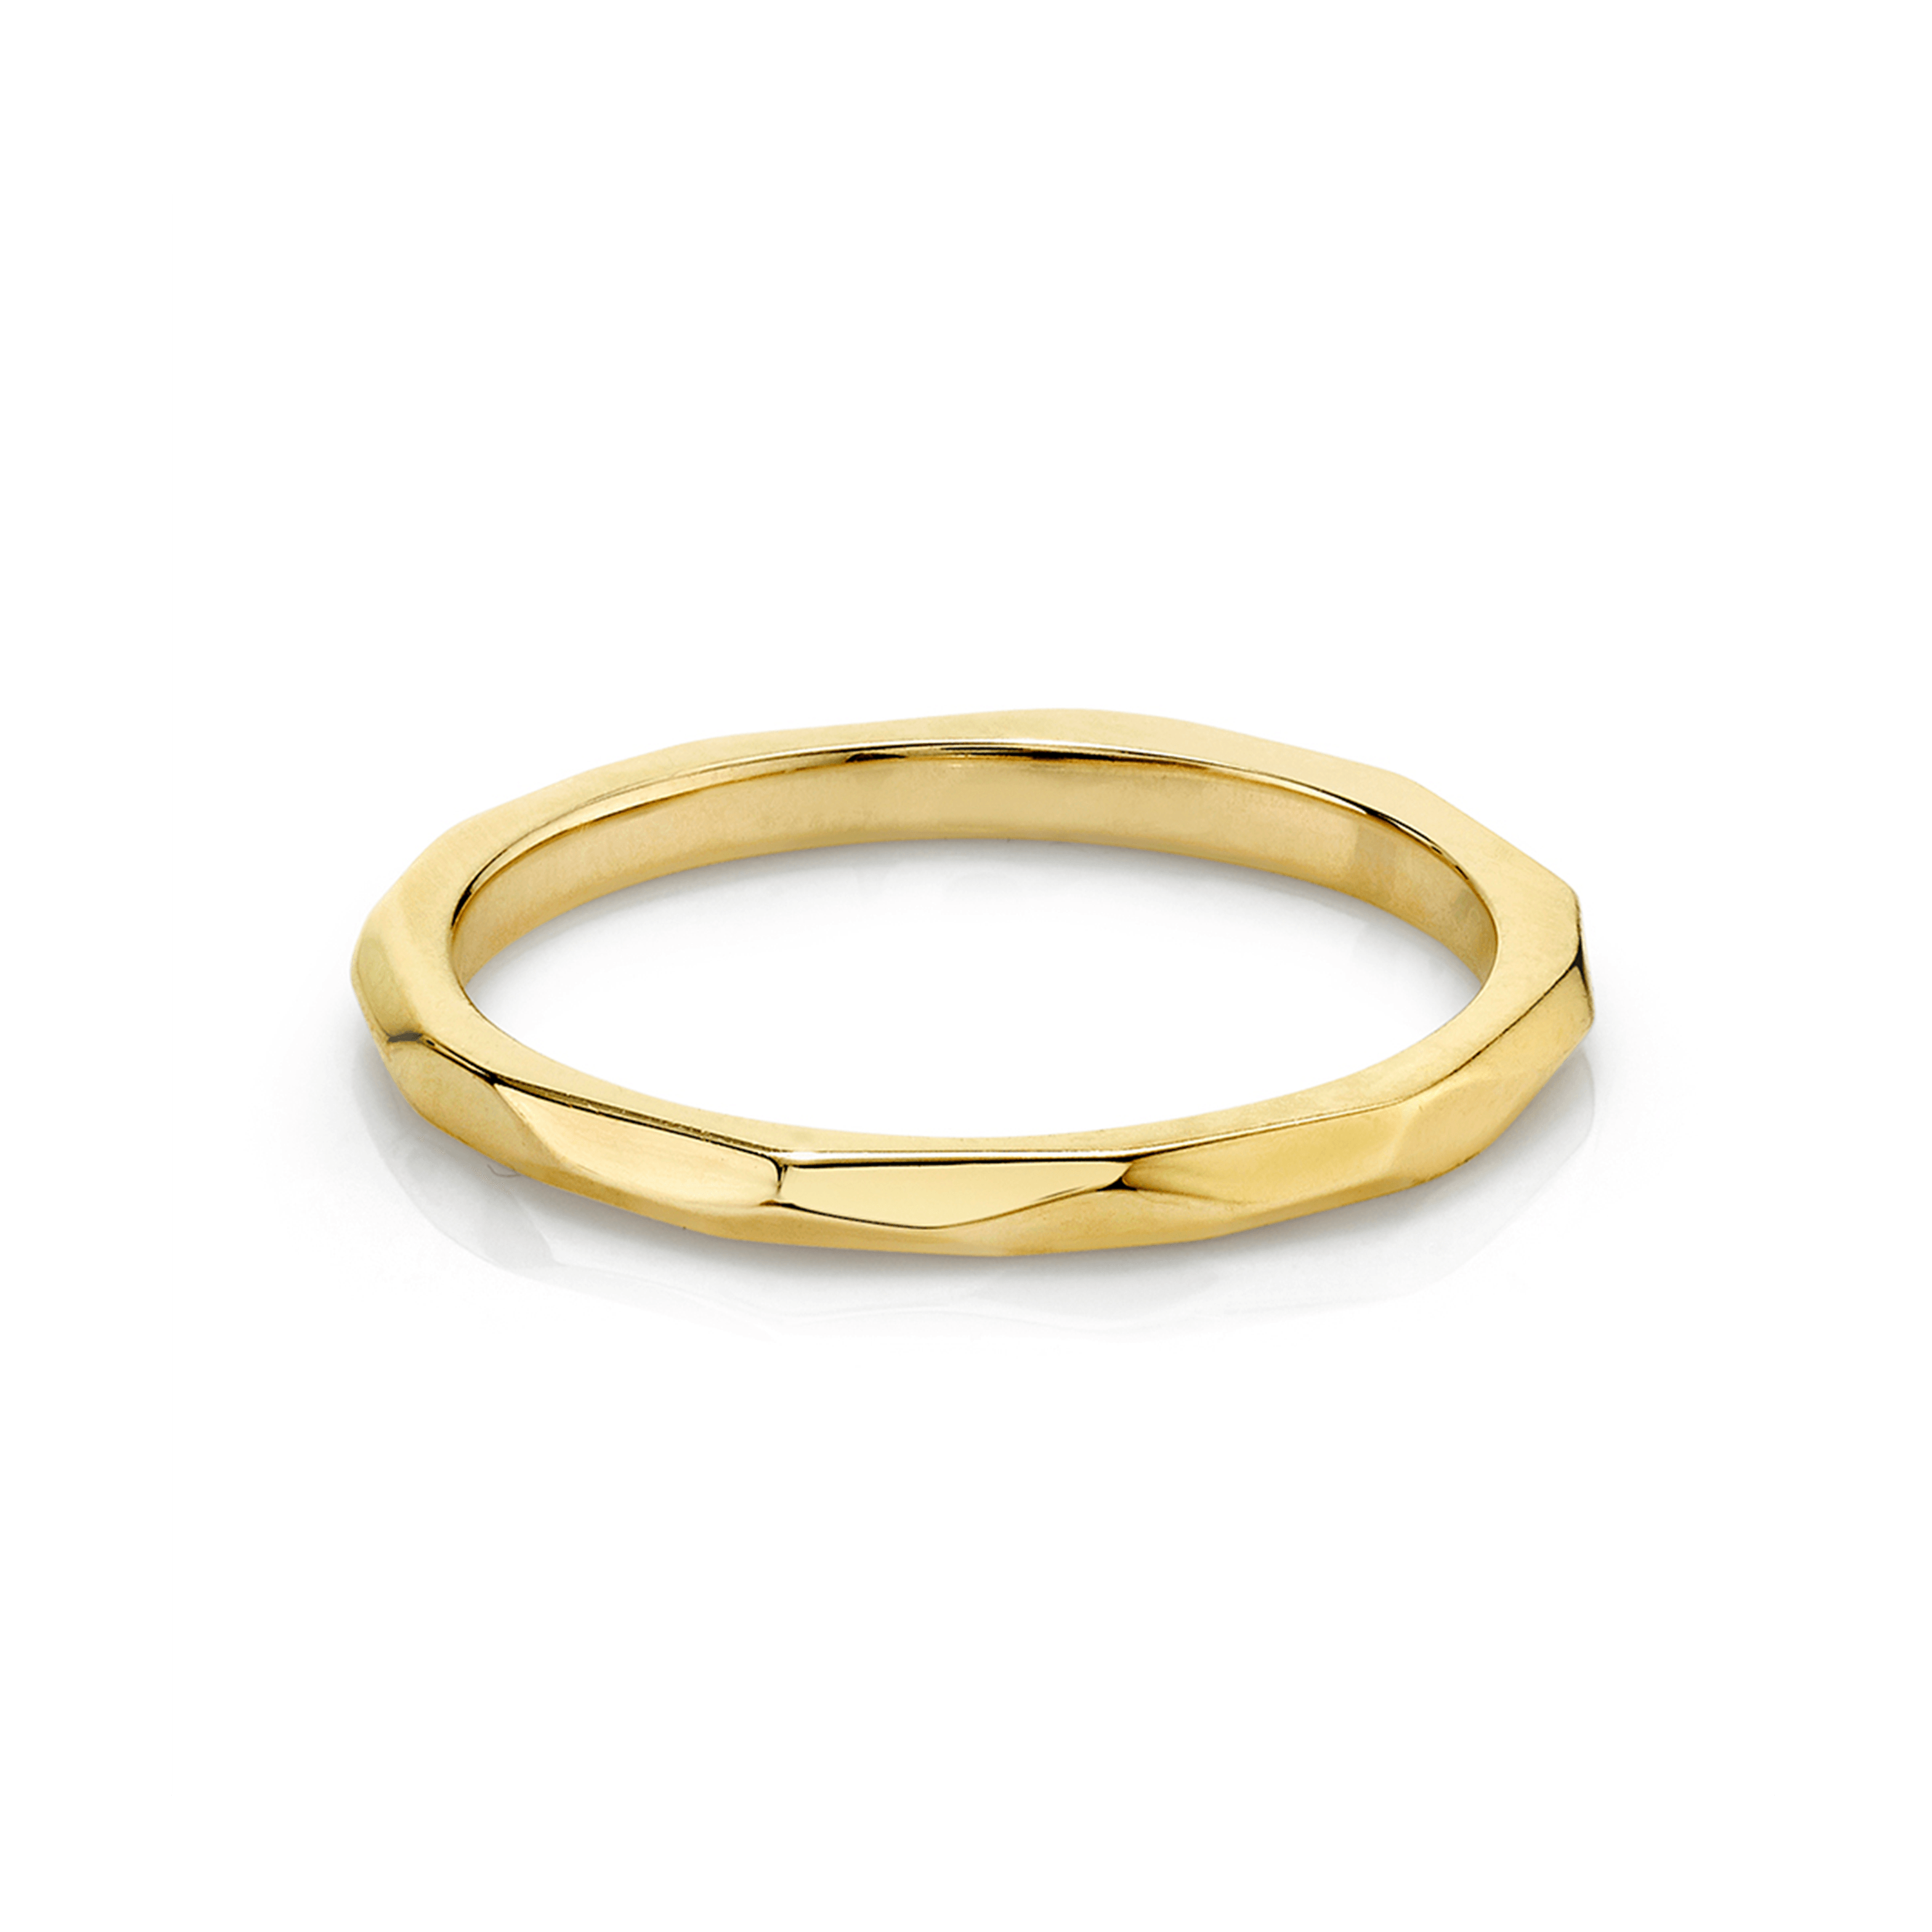 Marrow Fine Jewelry Hand-Carved Geometric Accent Everyday Gold Stacking Band